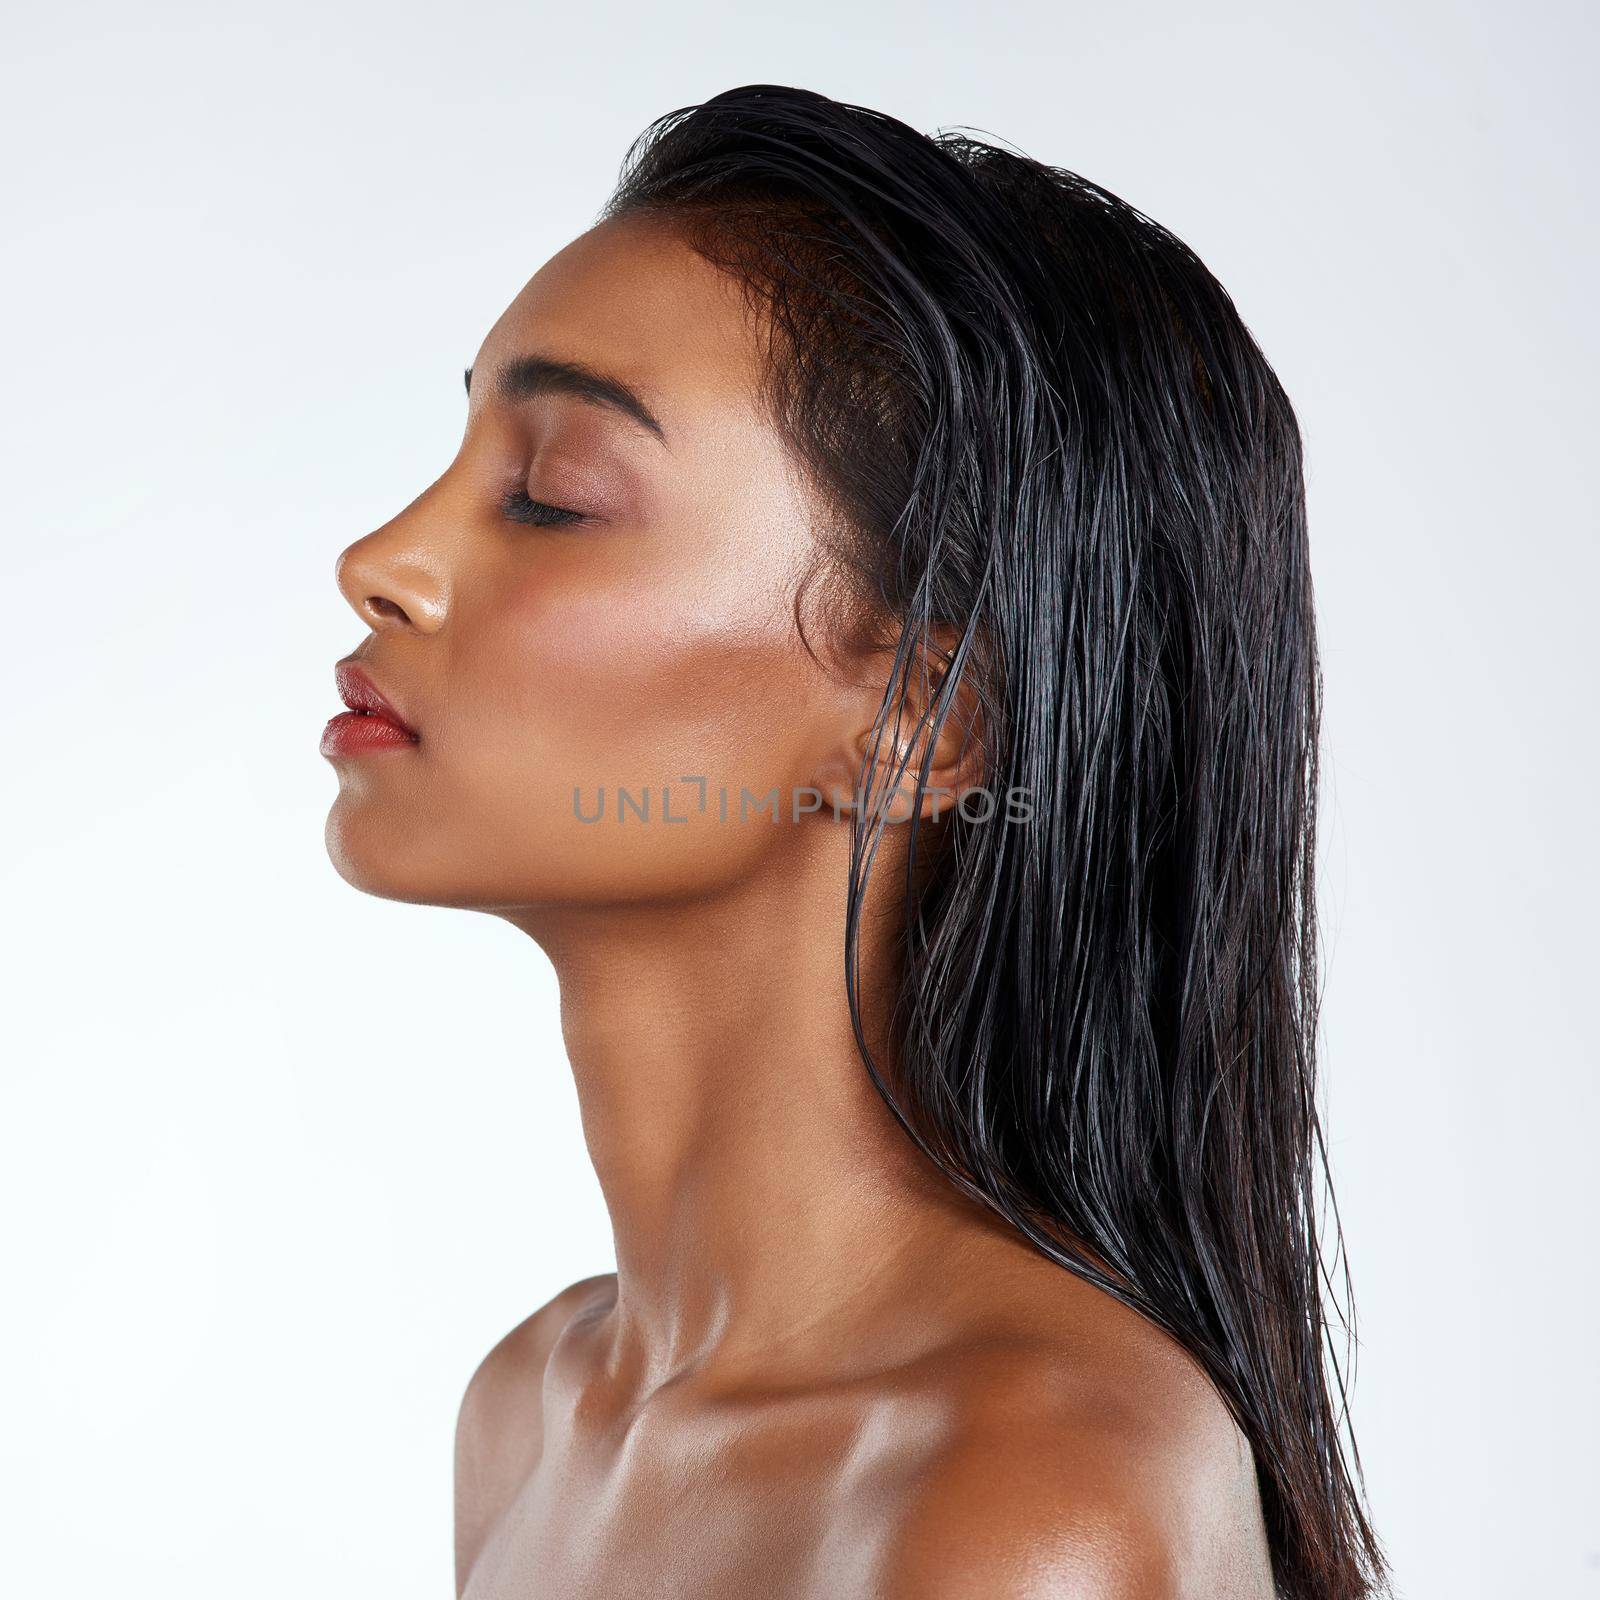 Studio shot of a beautiful young woman posing against a light background.